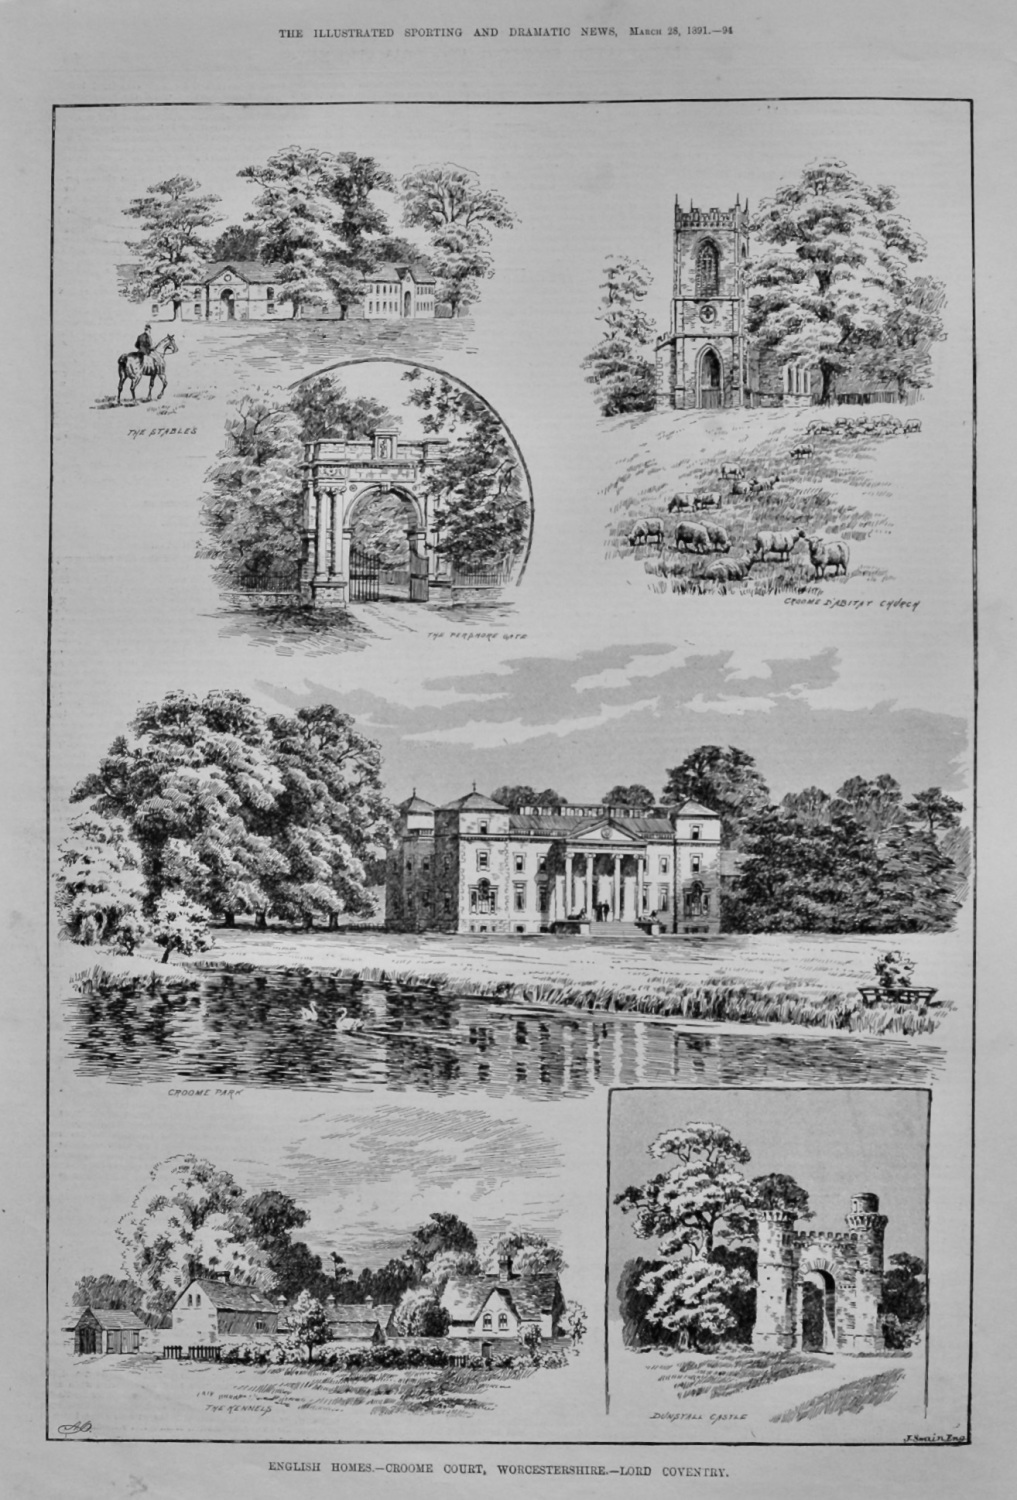 English Homes.- Croome Court, Worcestershire.- Lord Coventry.  1891.